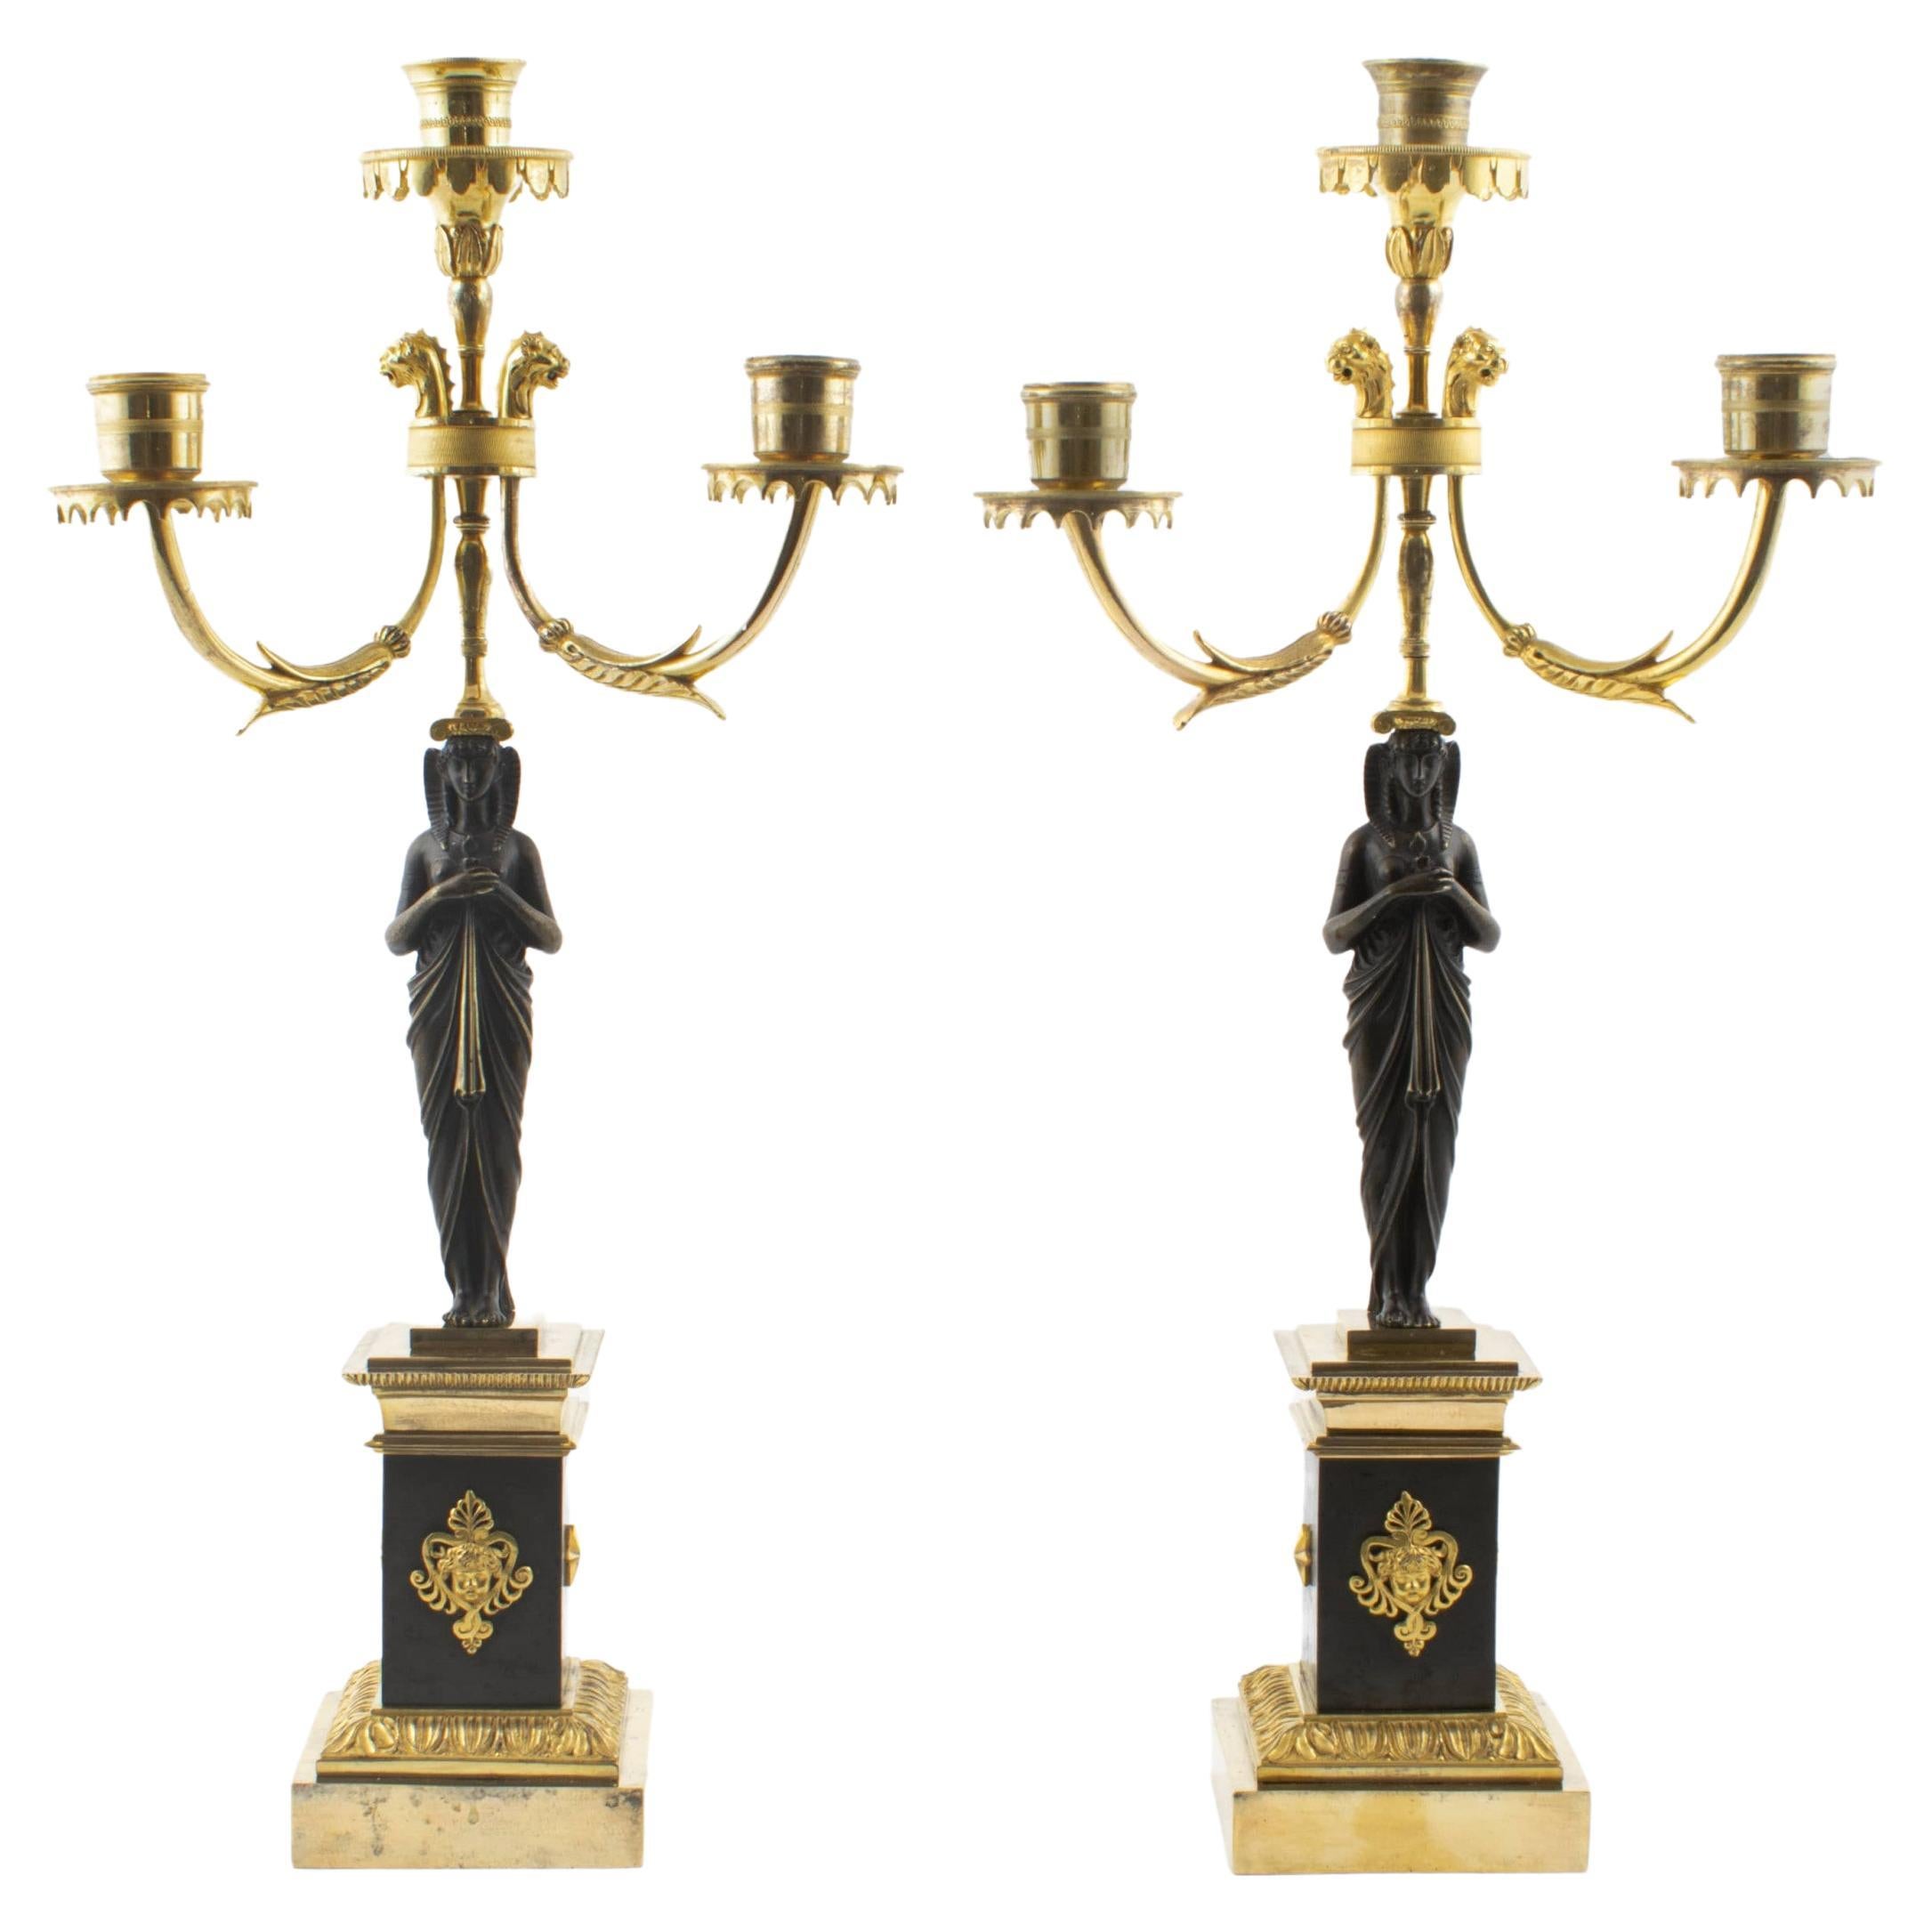 Pair of French Empire Candelabras. Women. Gilded And Patinated Bronze